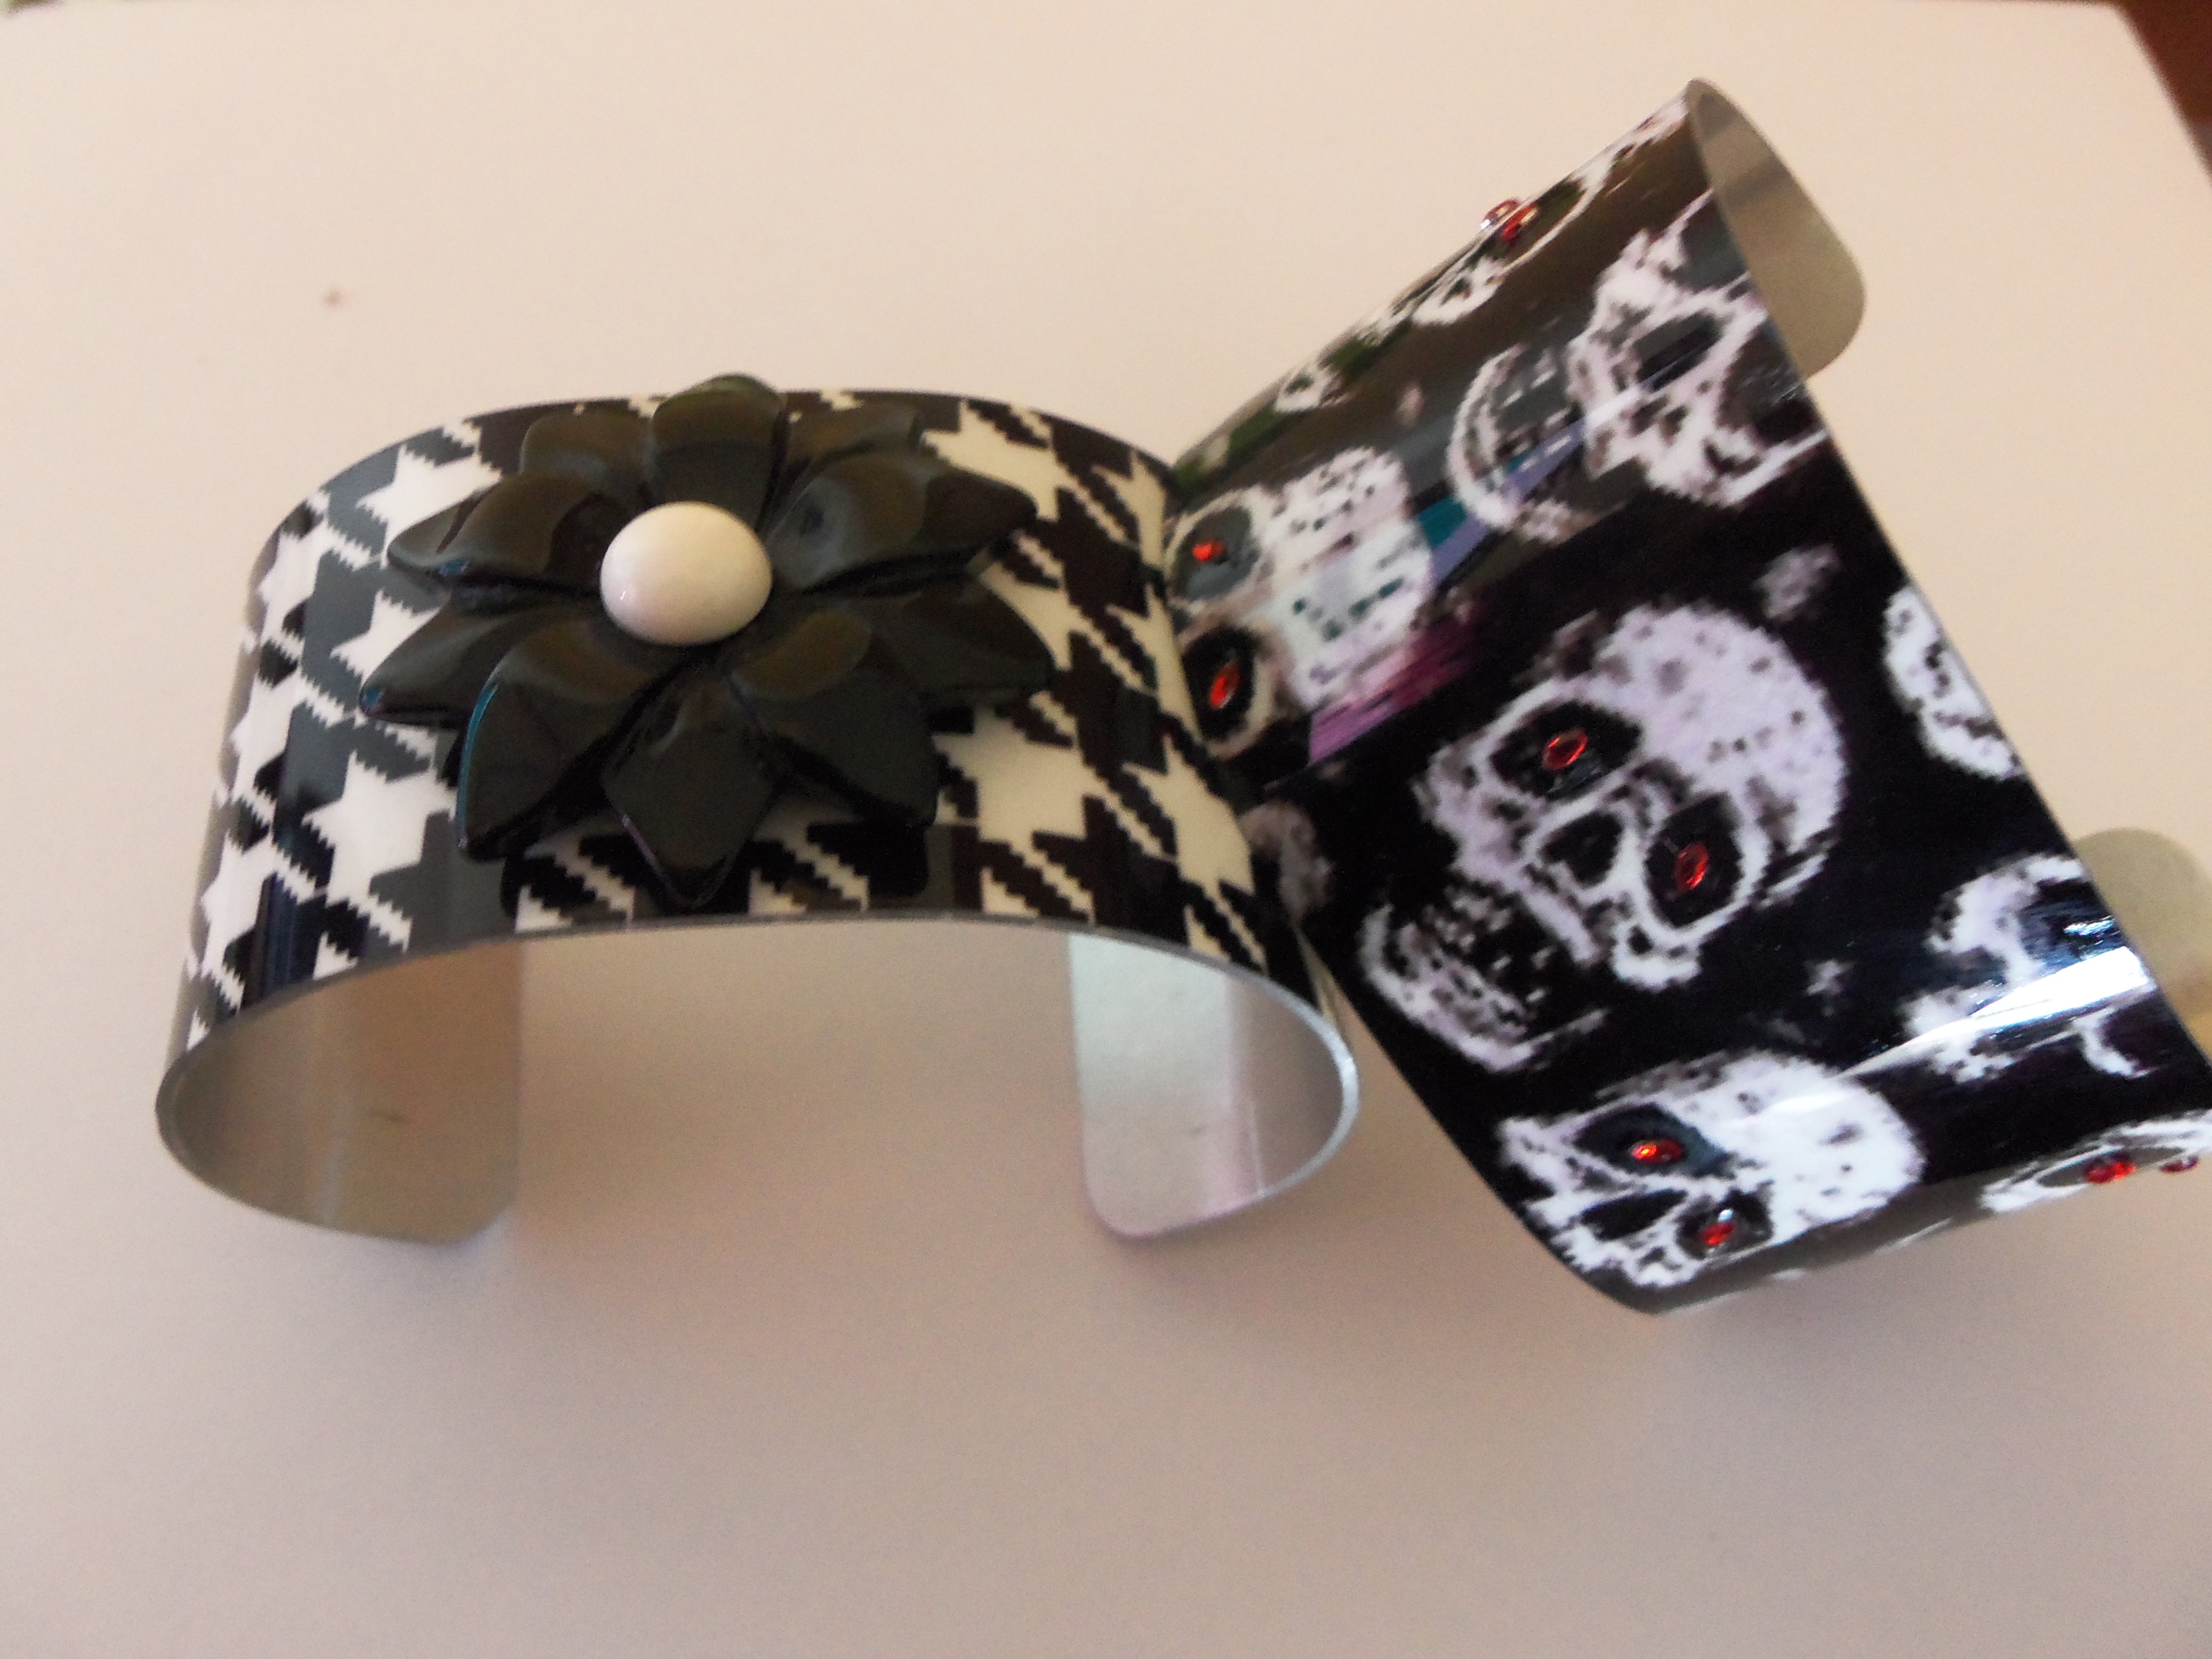 Cuff Bracelet made with sublimation printing